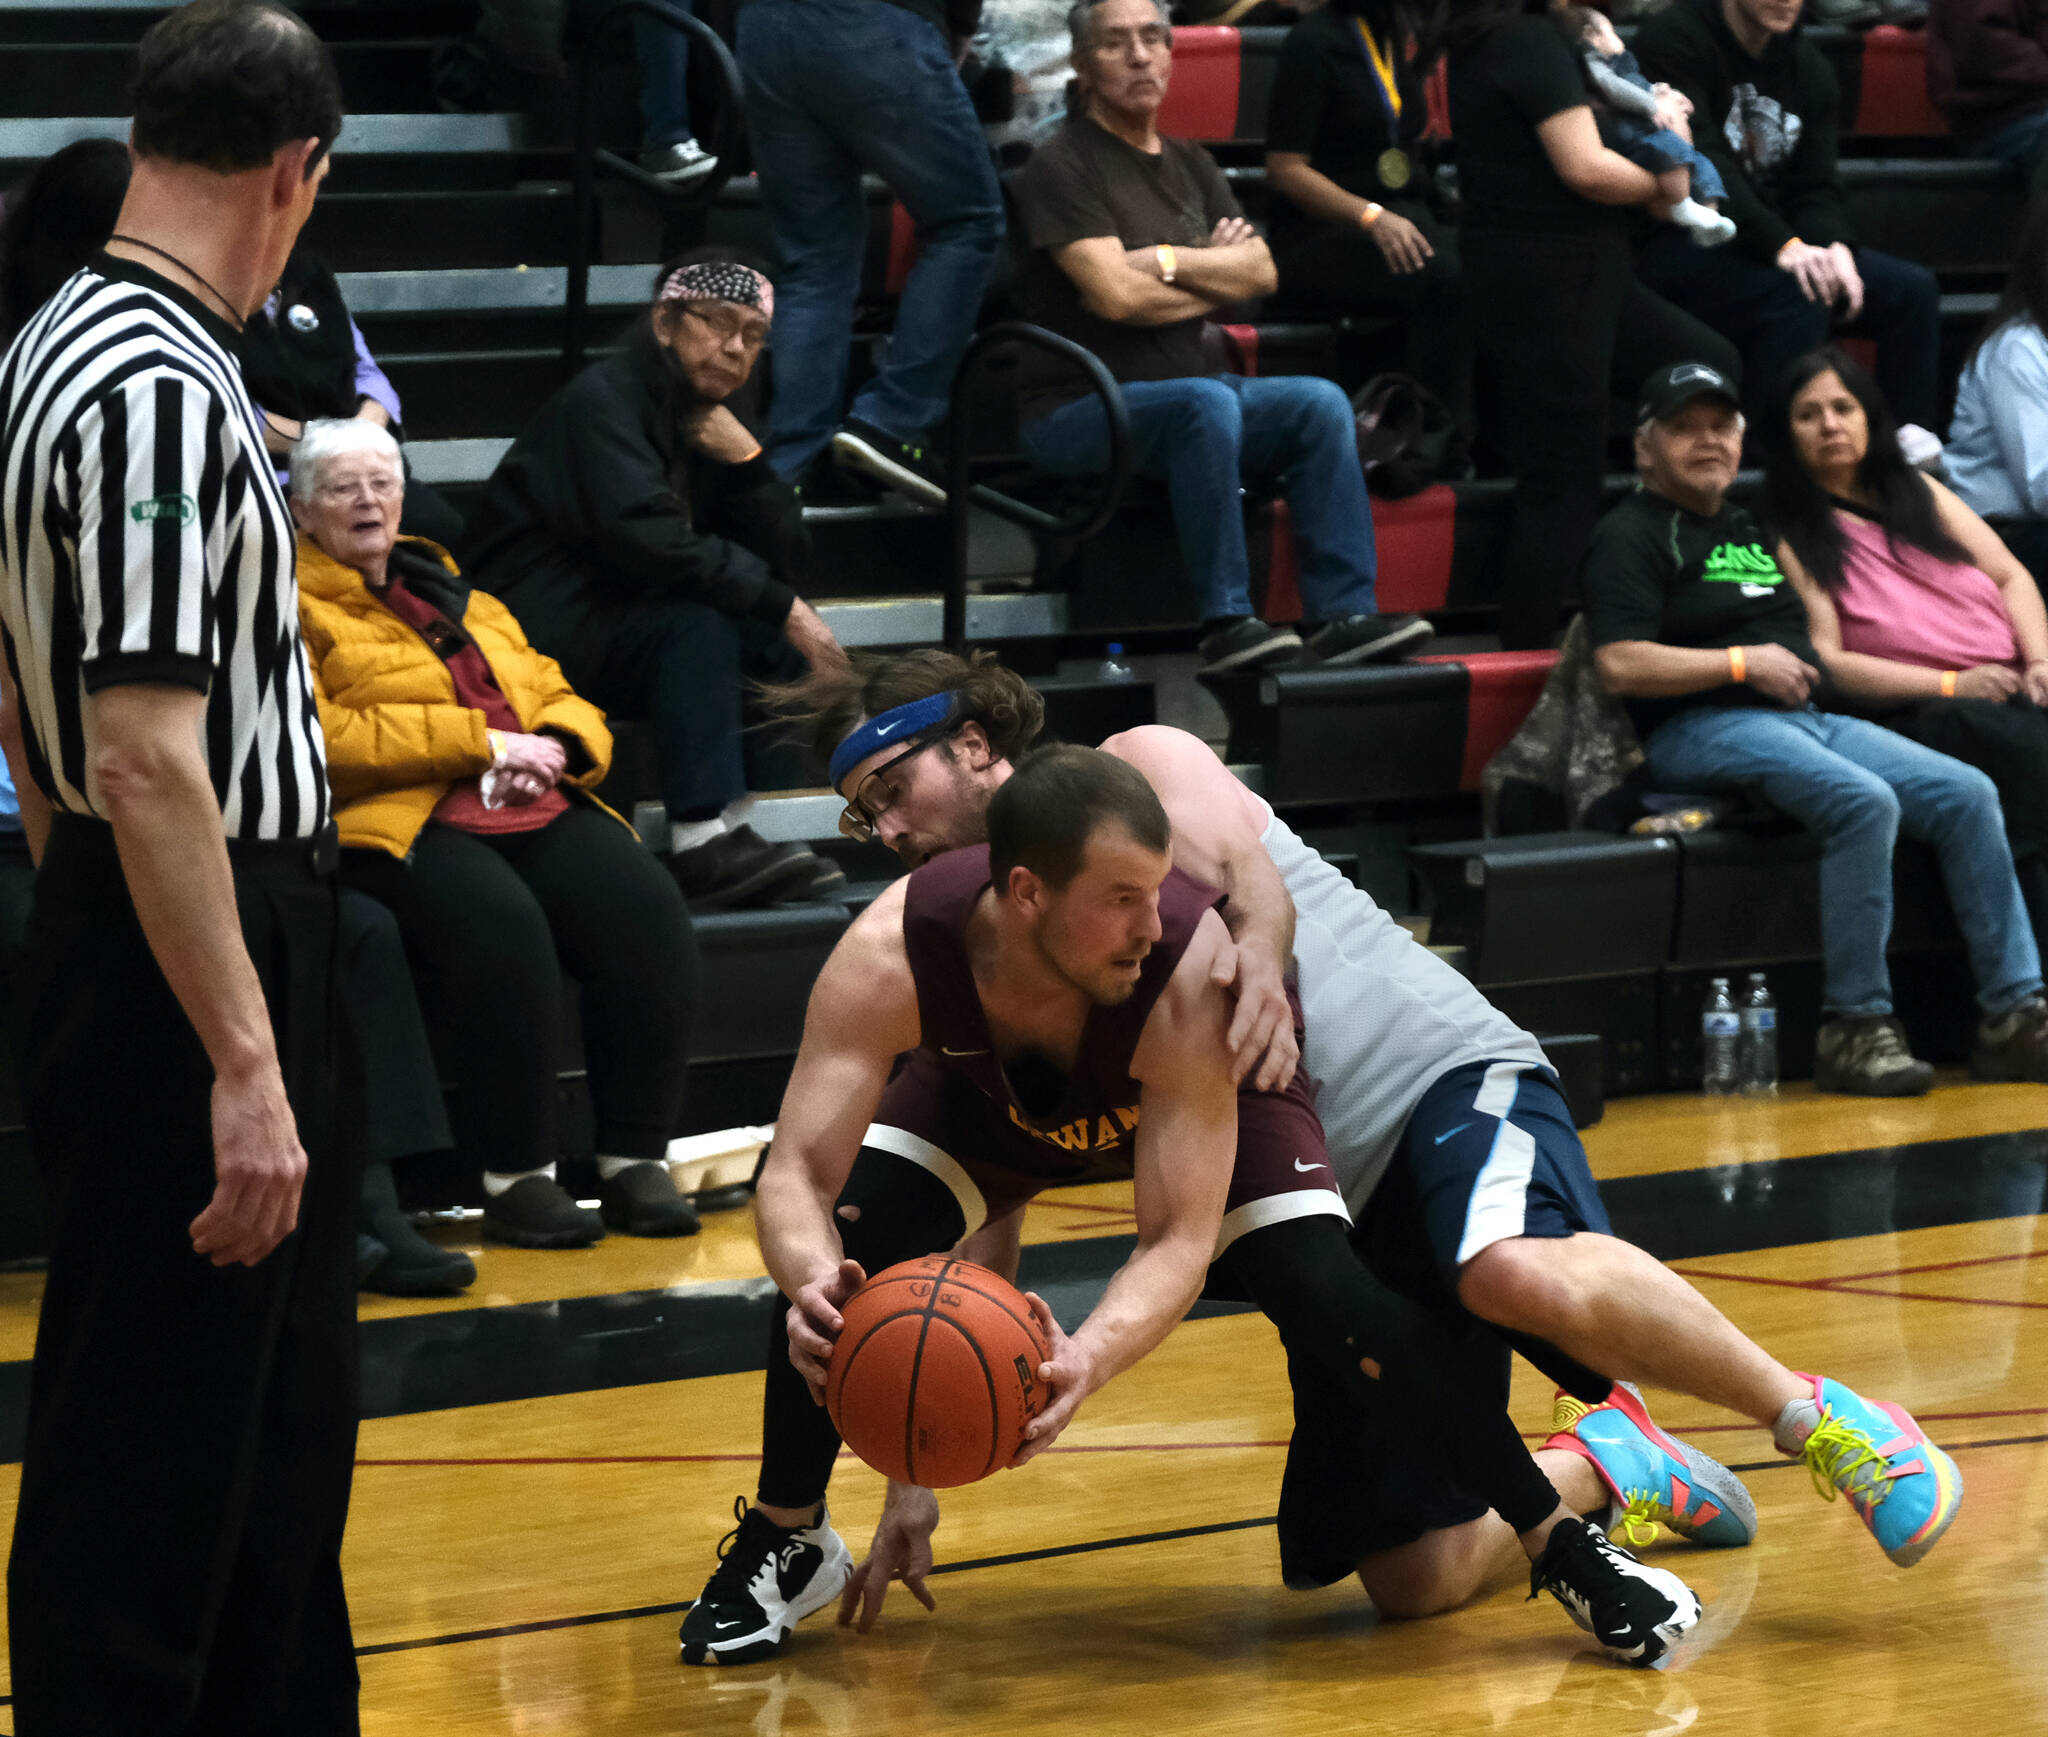 Klukwan’s Bryan Combs is fouled by Filcom’s Adam Brown during the C Bracket Championship game of the Gold Medal Basketball Tournament, Saturday, March 25, at Juneau-Douglas High School: Yadaa.at Kalé. (Klas Stolpe/For the Juneau Empire)